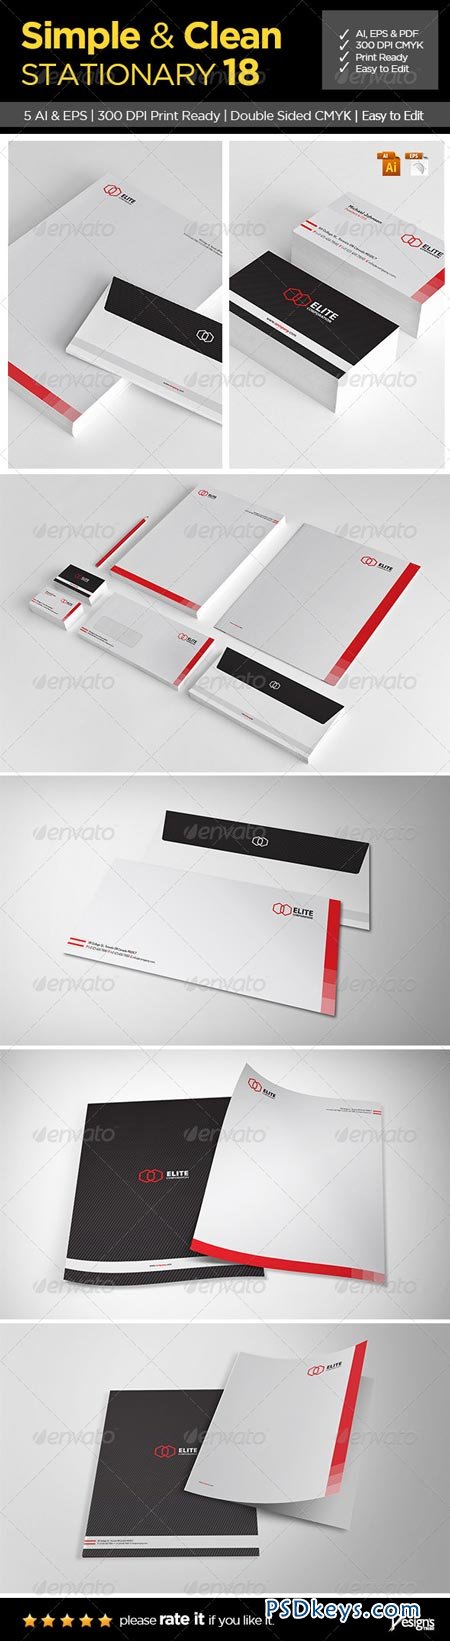 Simple and Clean Stationary 18 6507676